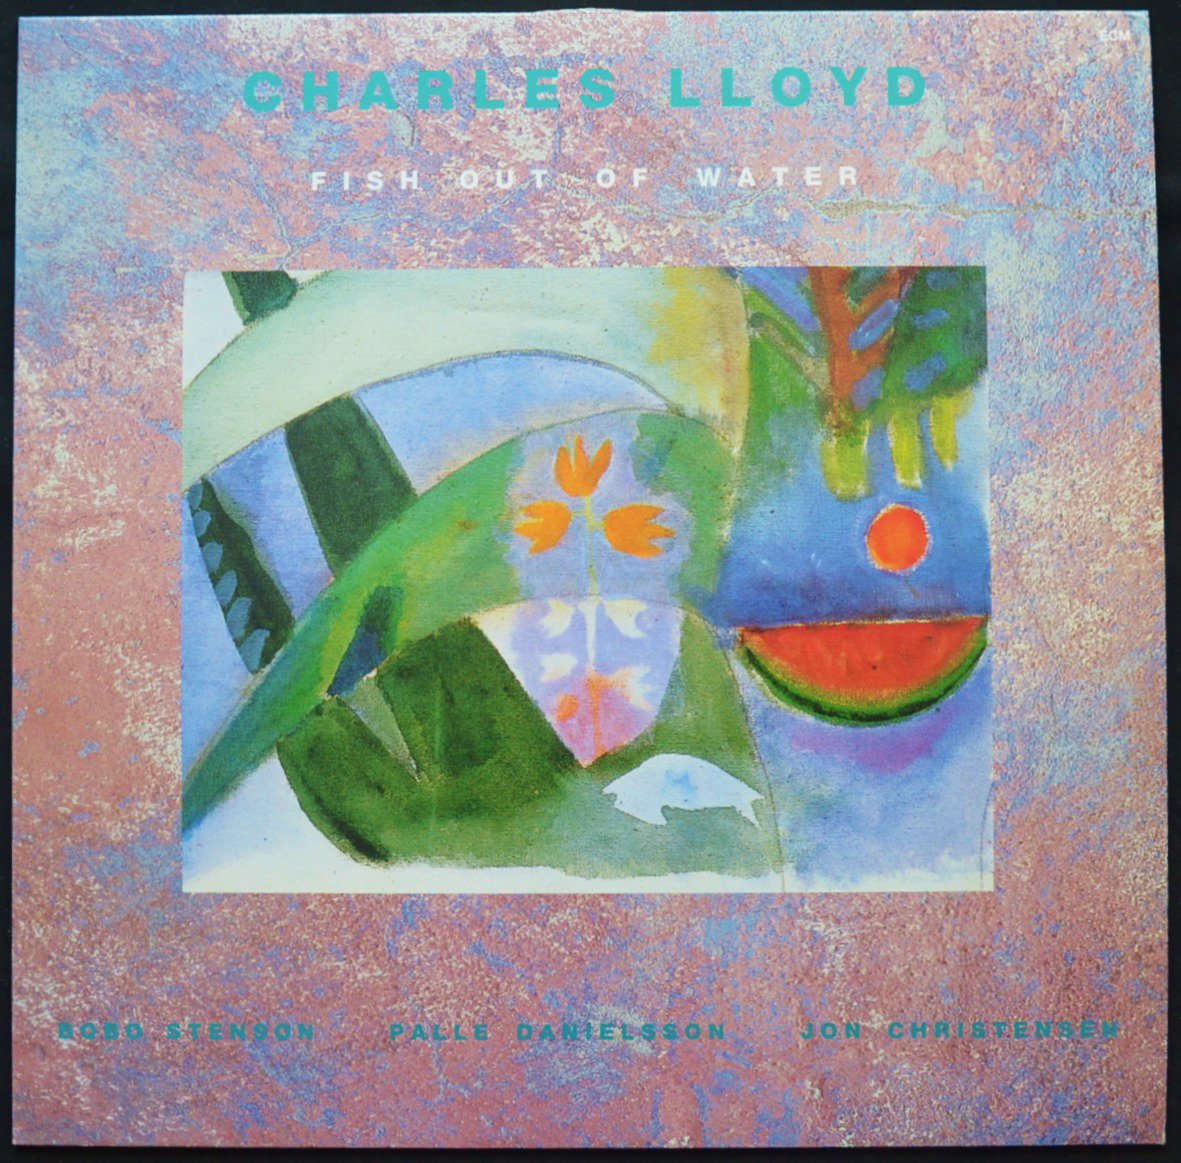 CHARLES LLOYD QUARTET / FISH OUT OF WATER (LP)